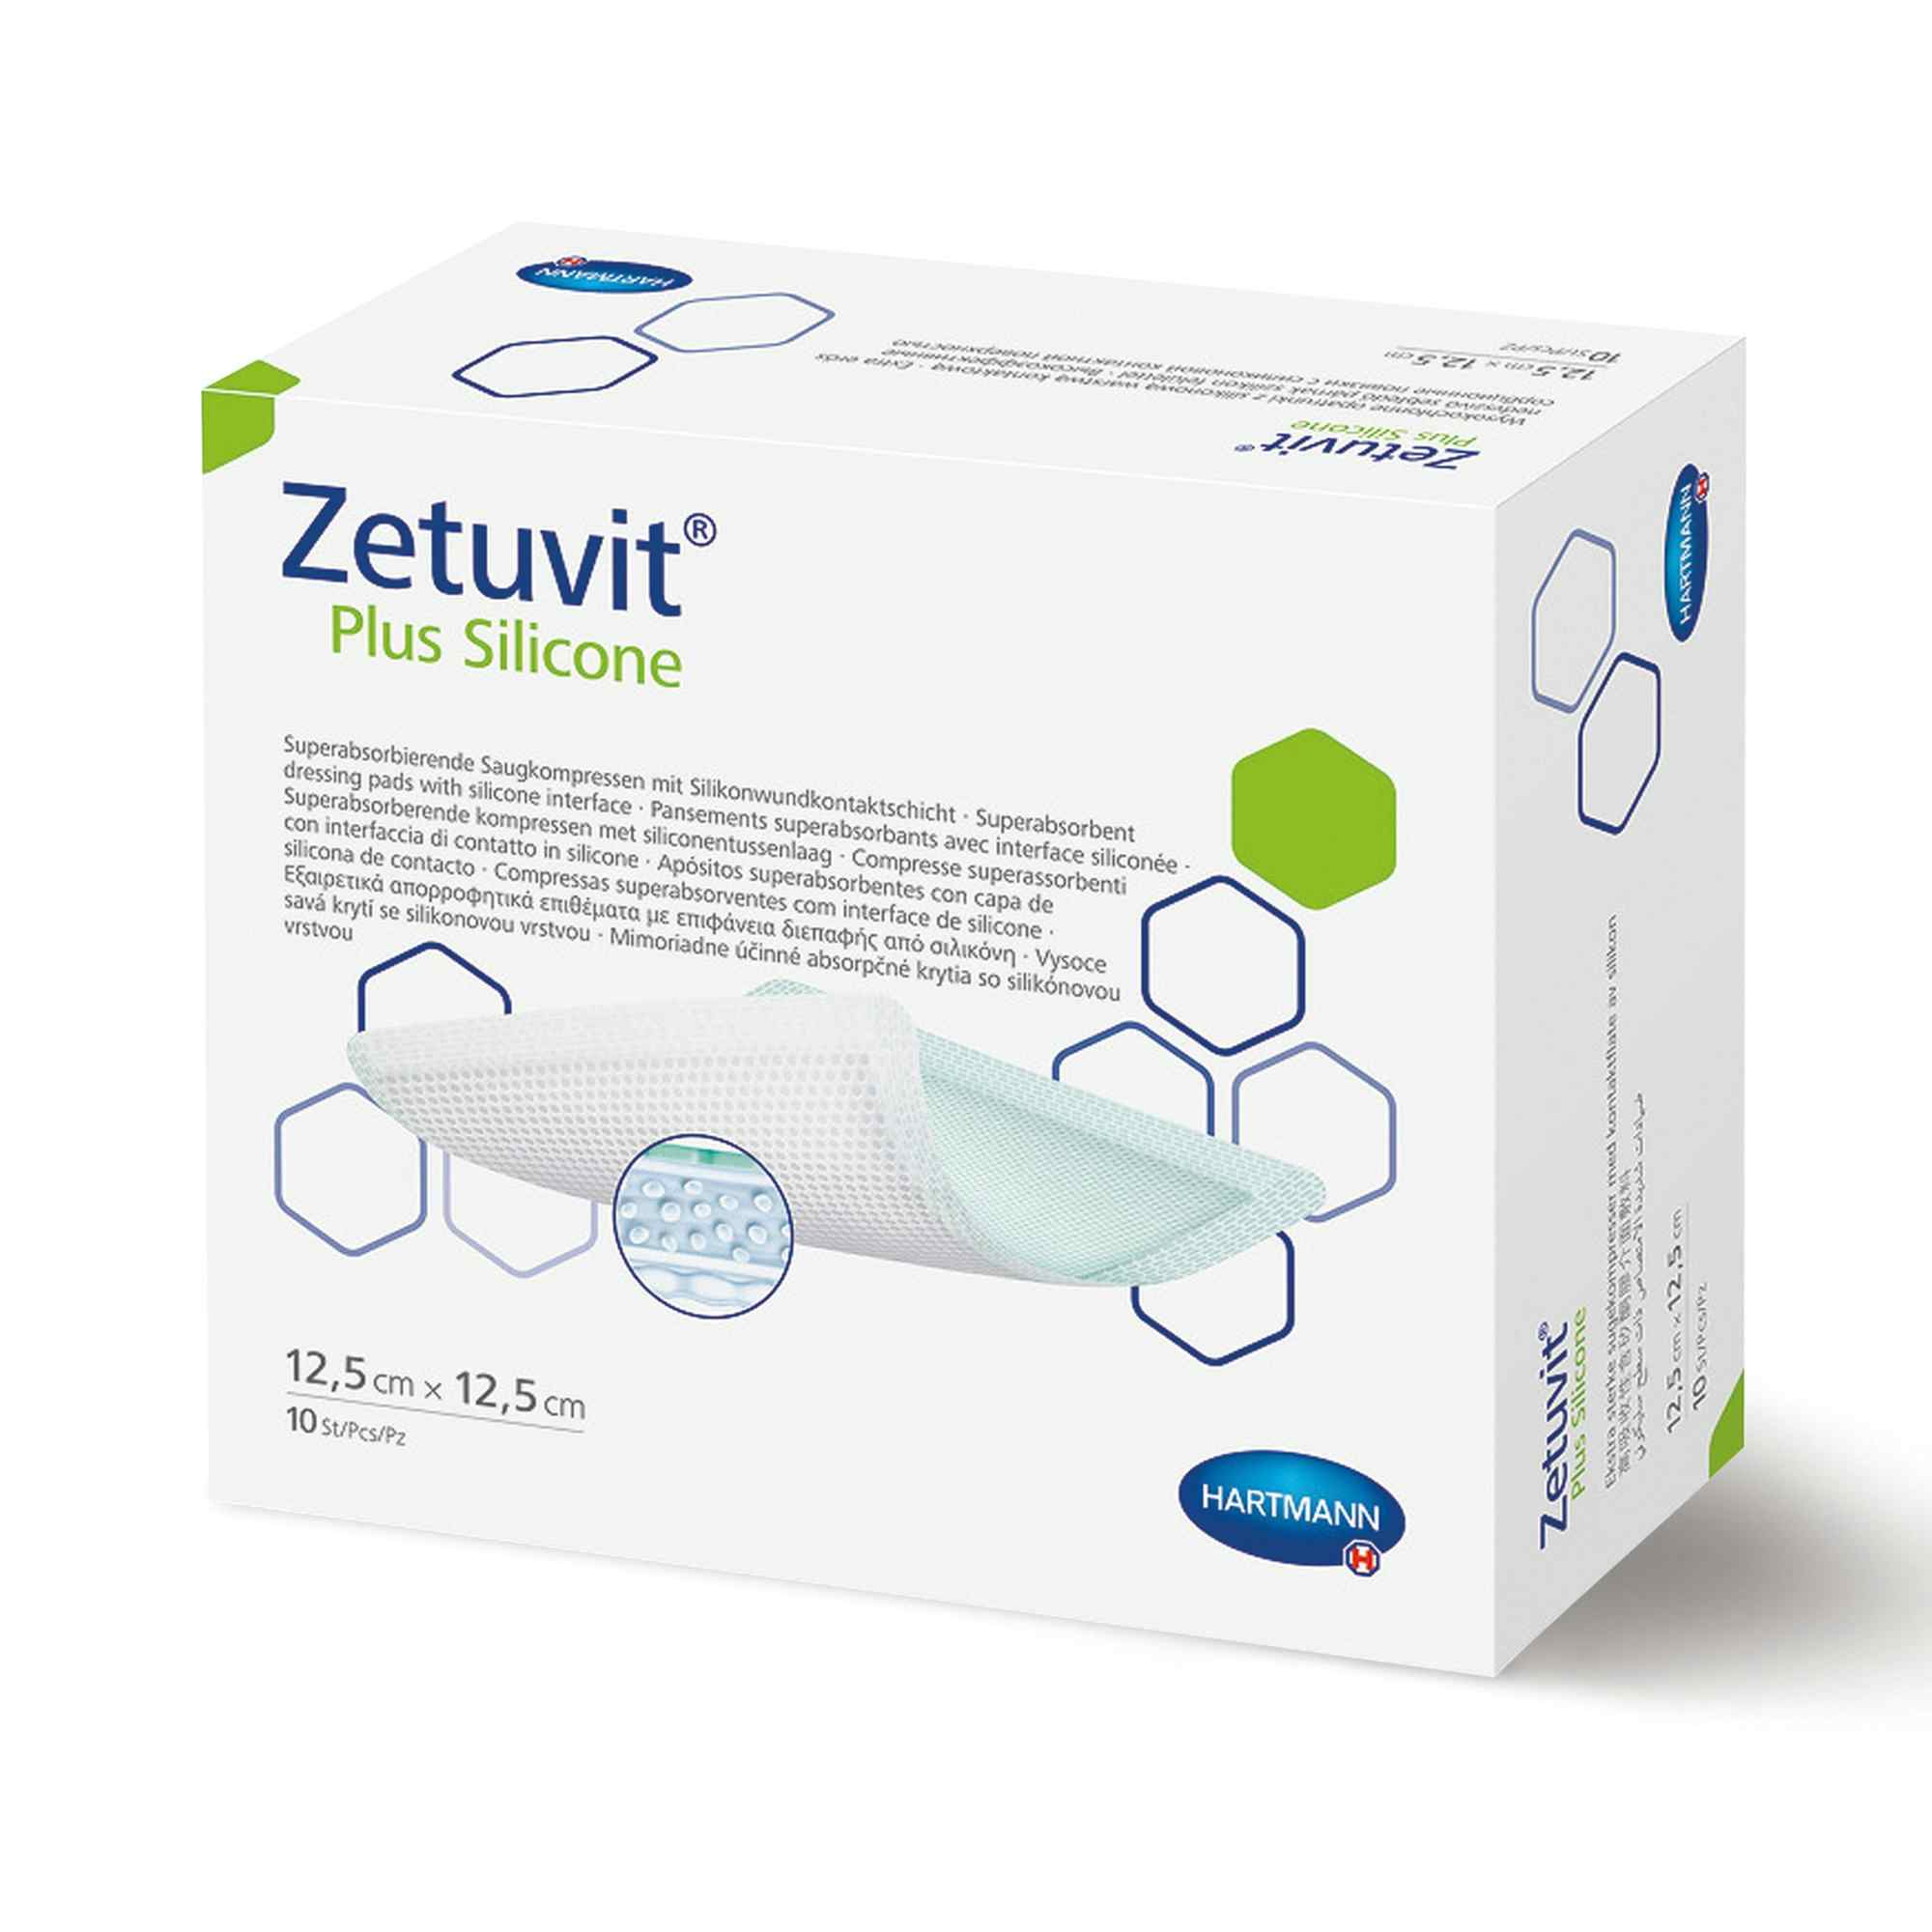 Zetuvit Plus Silicone Super Absorbent Dressing, 4 X 8", 413116, Box of 10